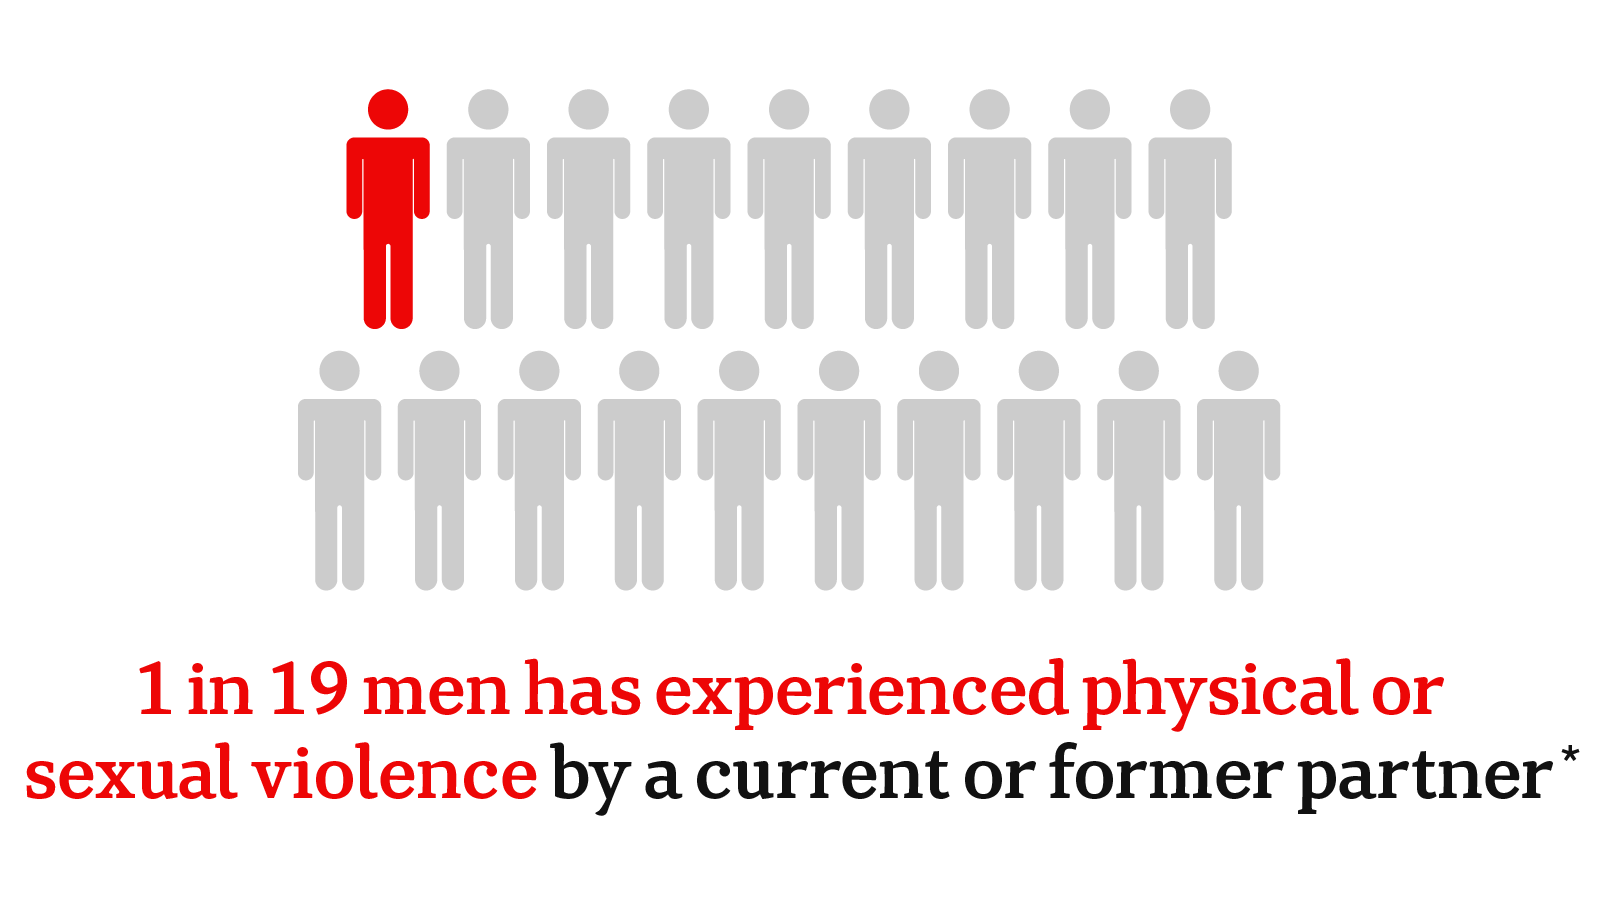 1 in 19 men has experienced physical or sexual violence by a current or former partner